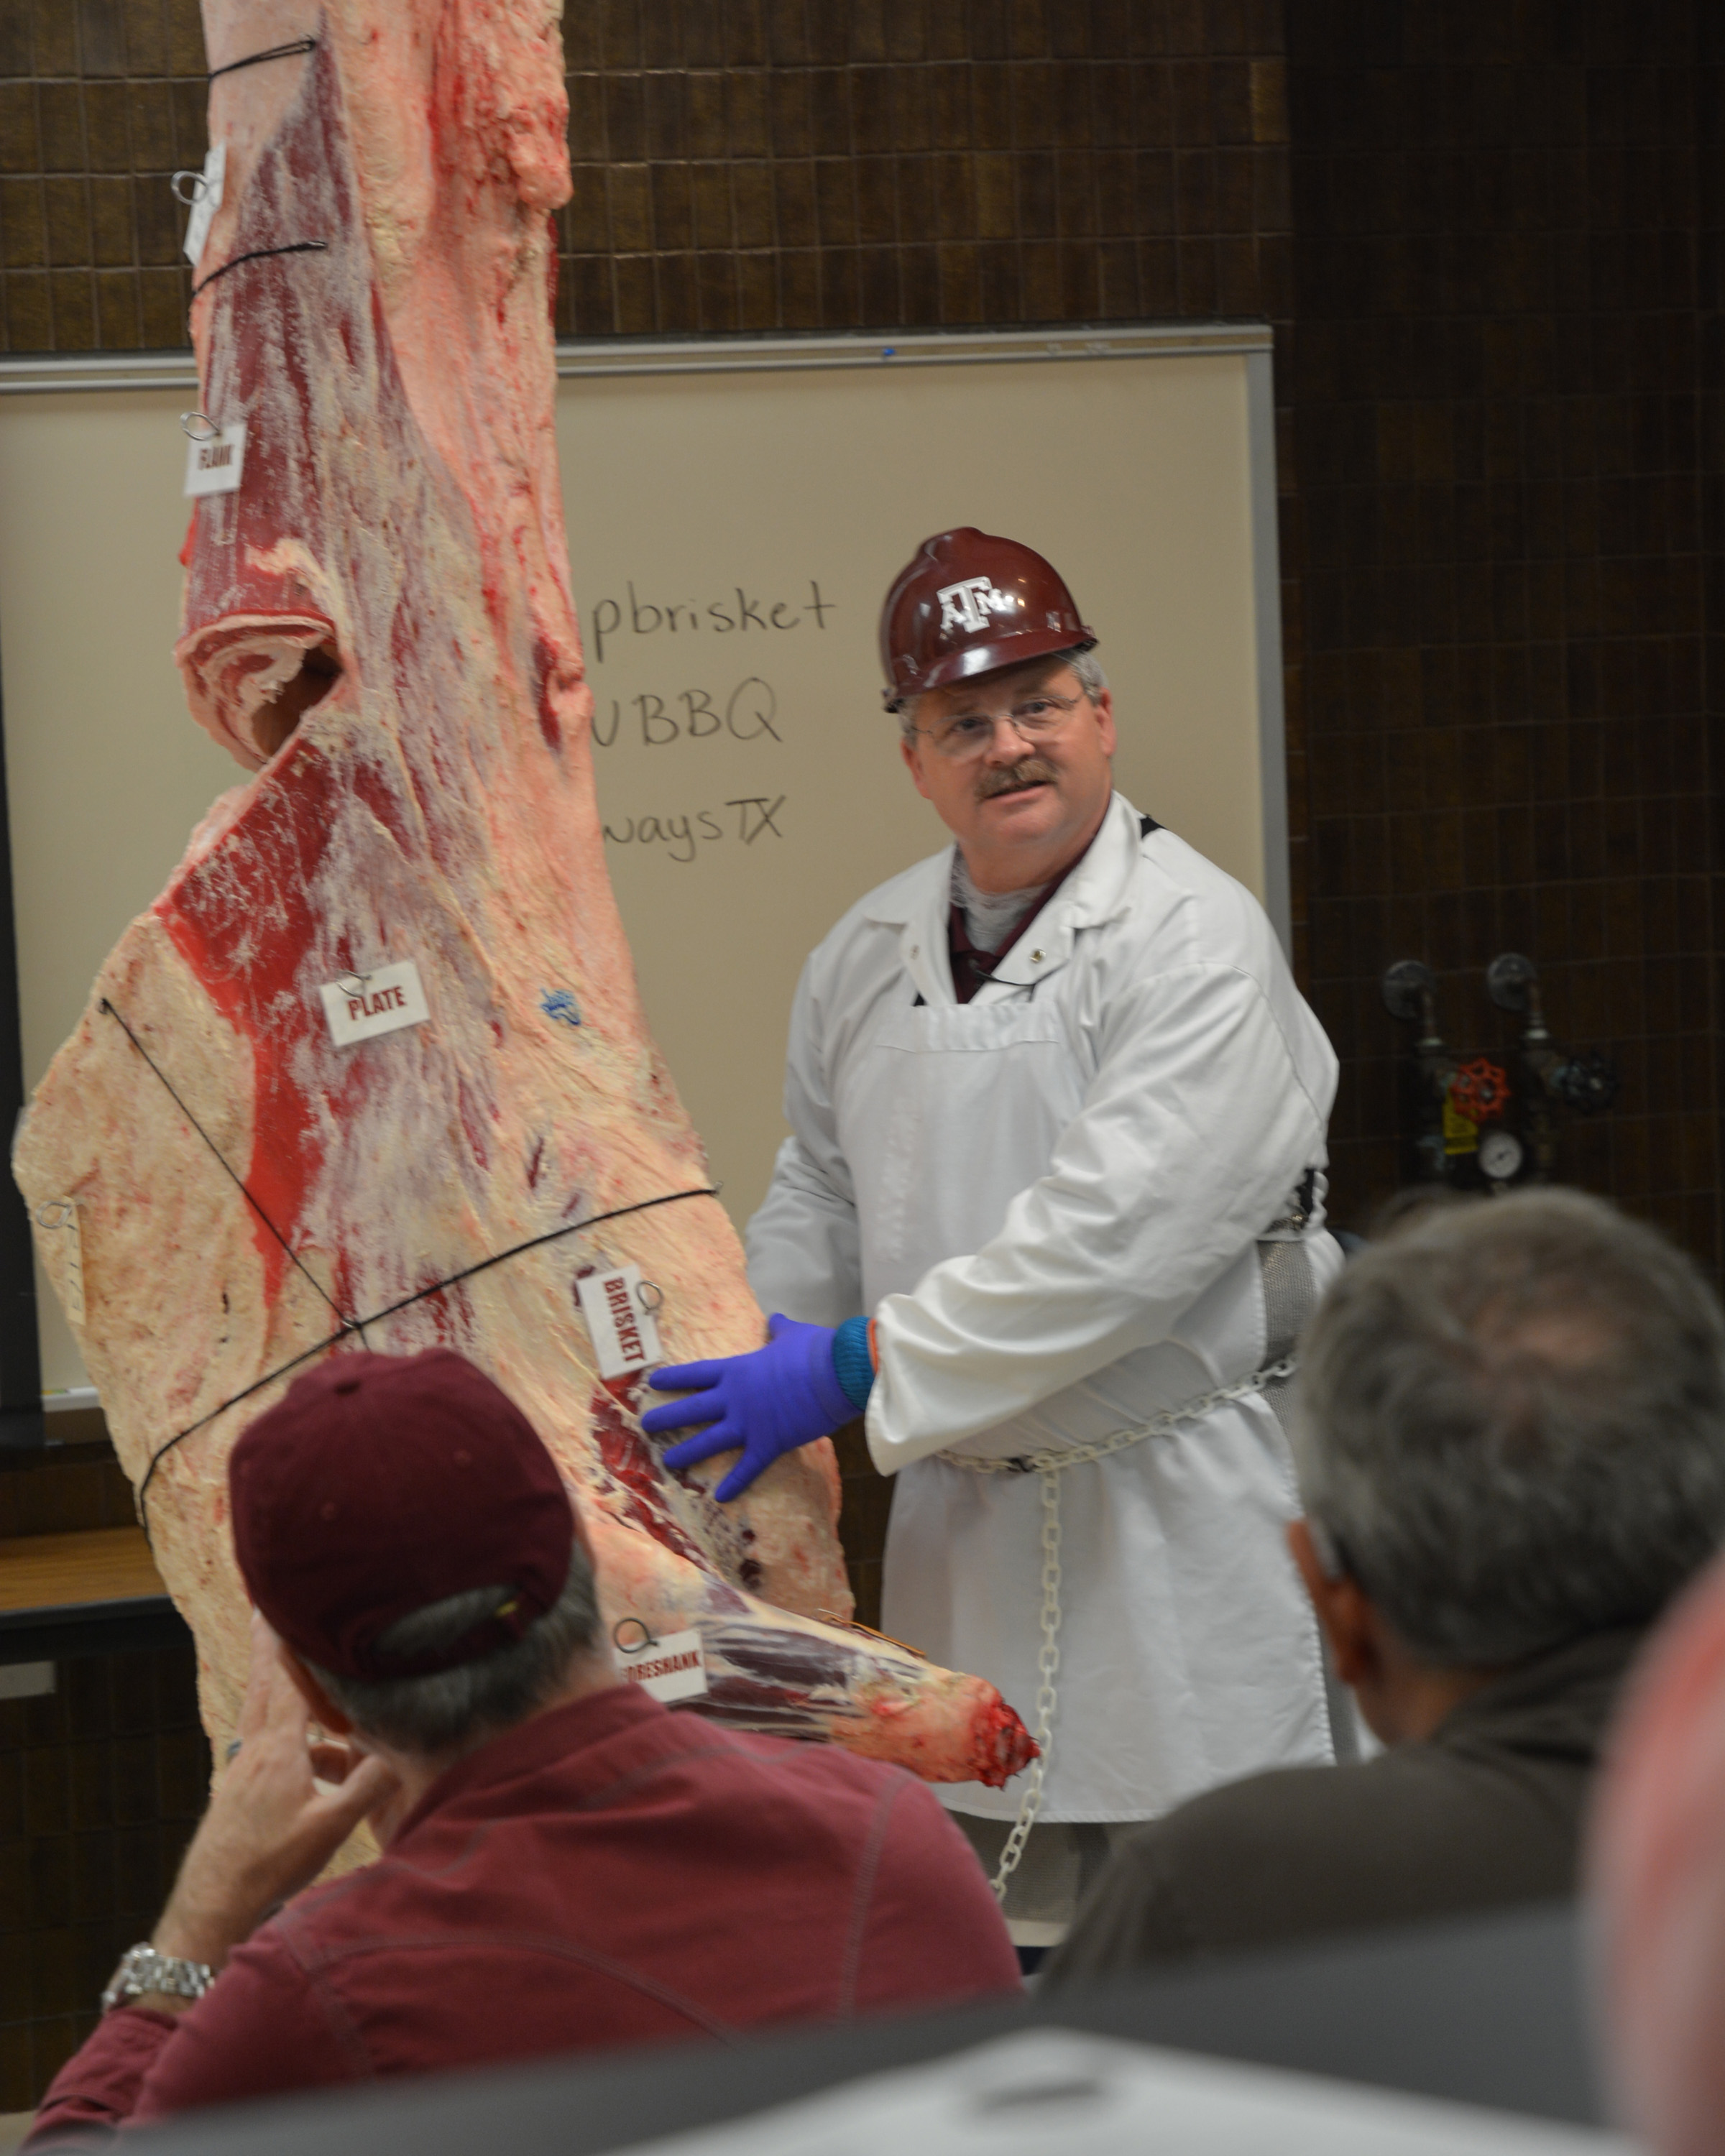 Dr. Davey Griffin discussing the anatomy of brisket.